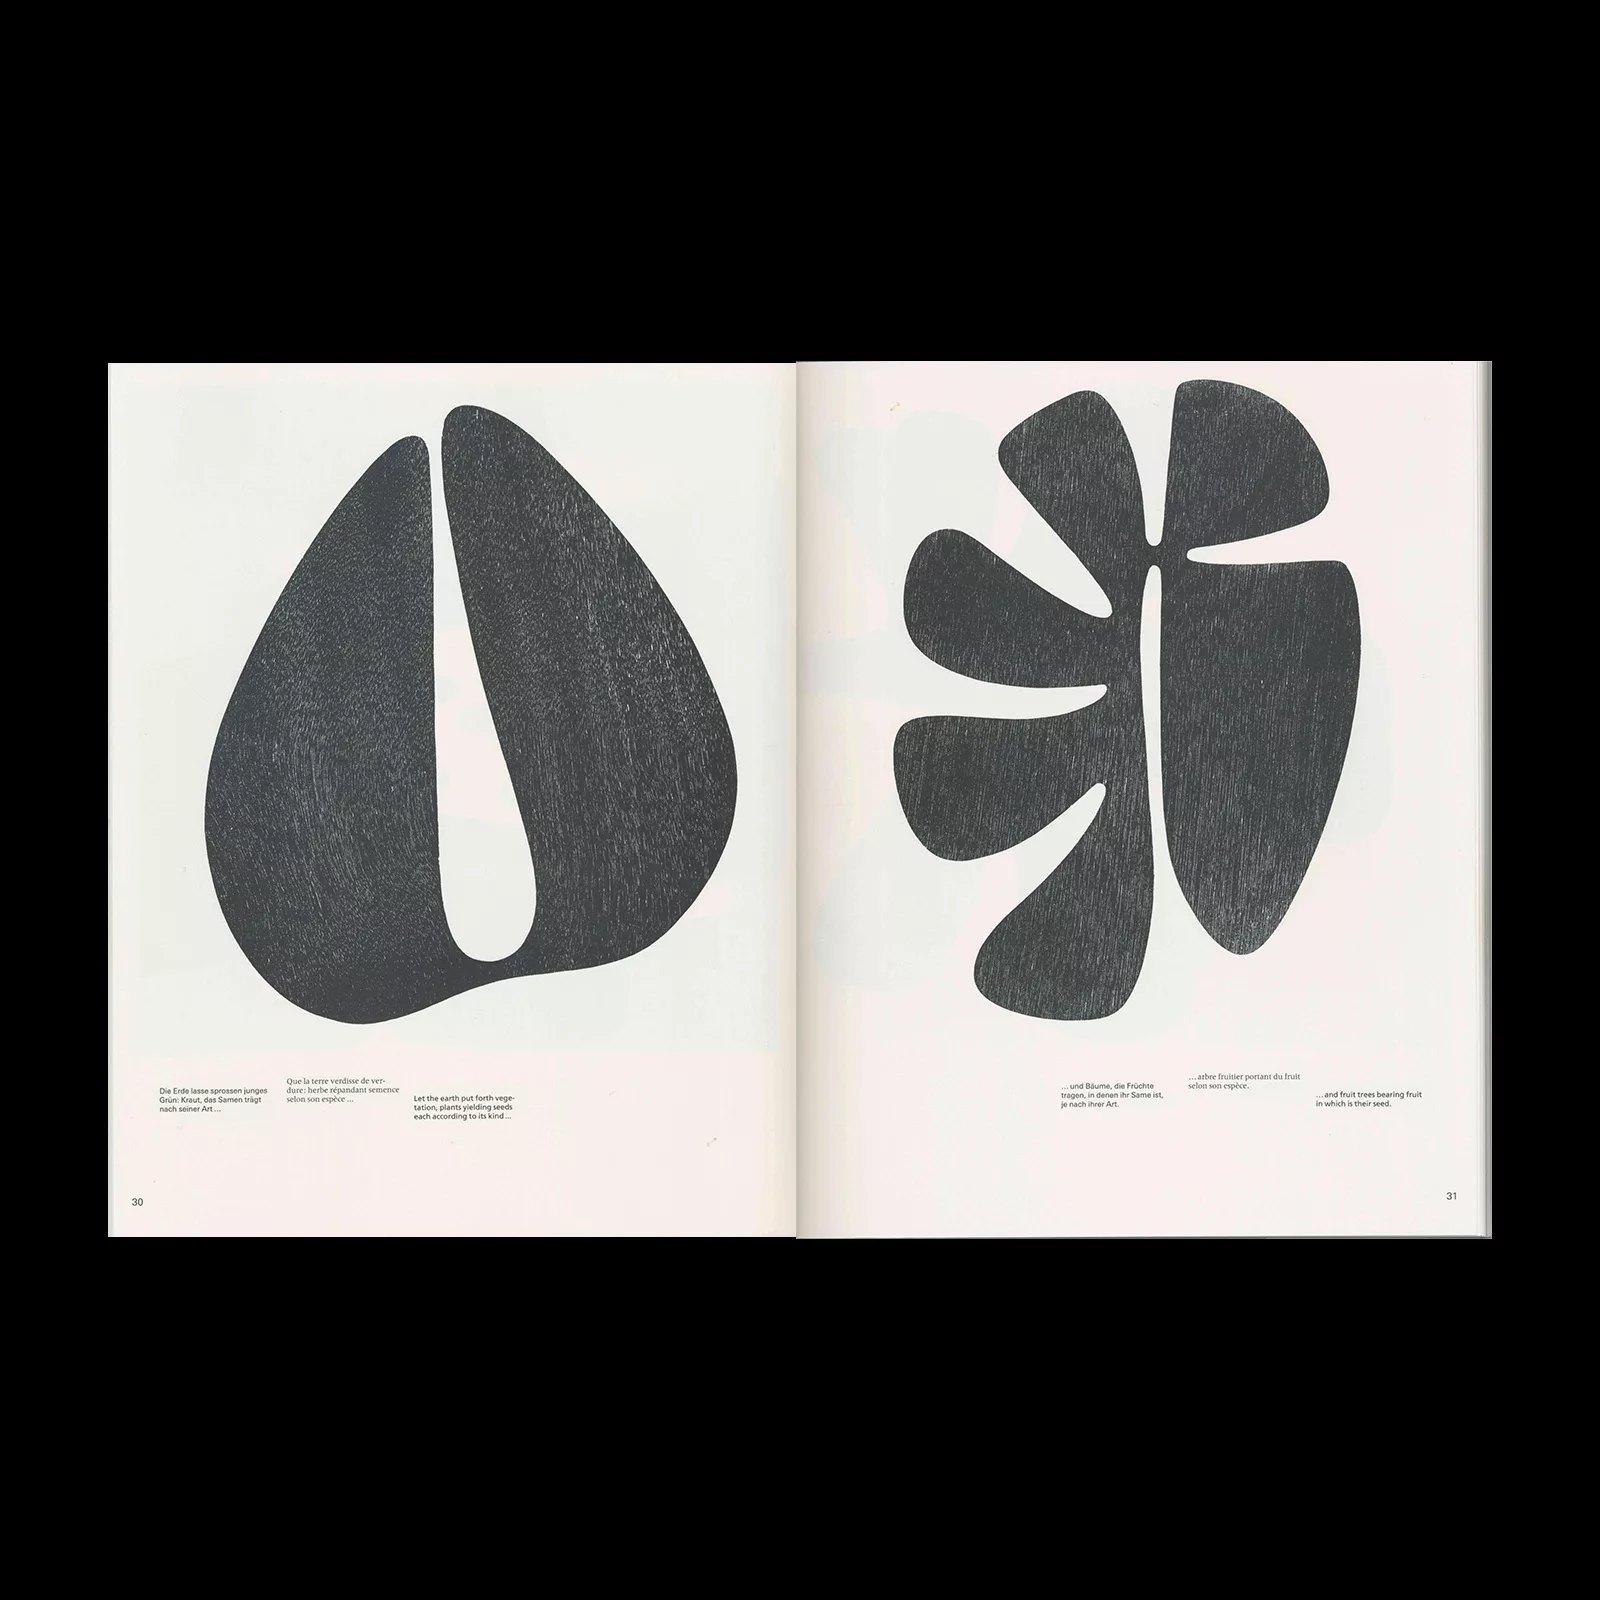 Adrian Frutiger, Forms and counterforms, 1999